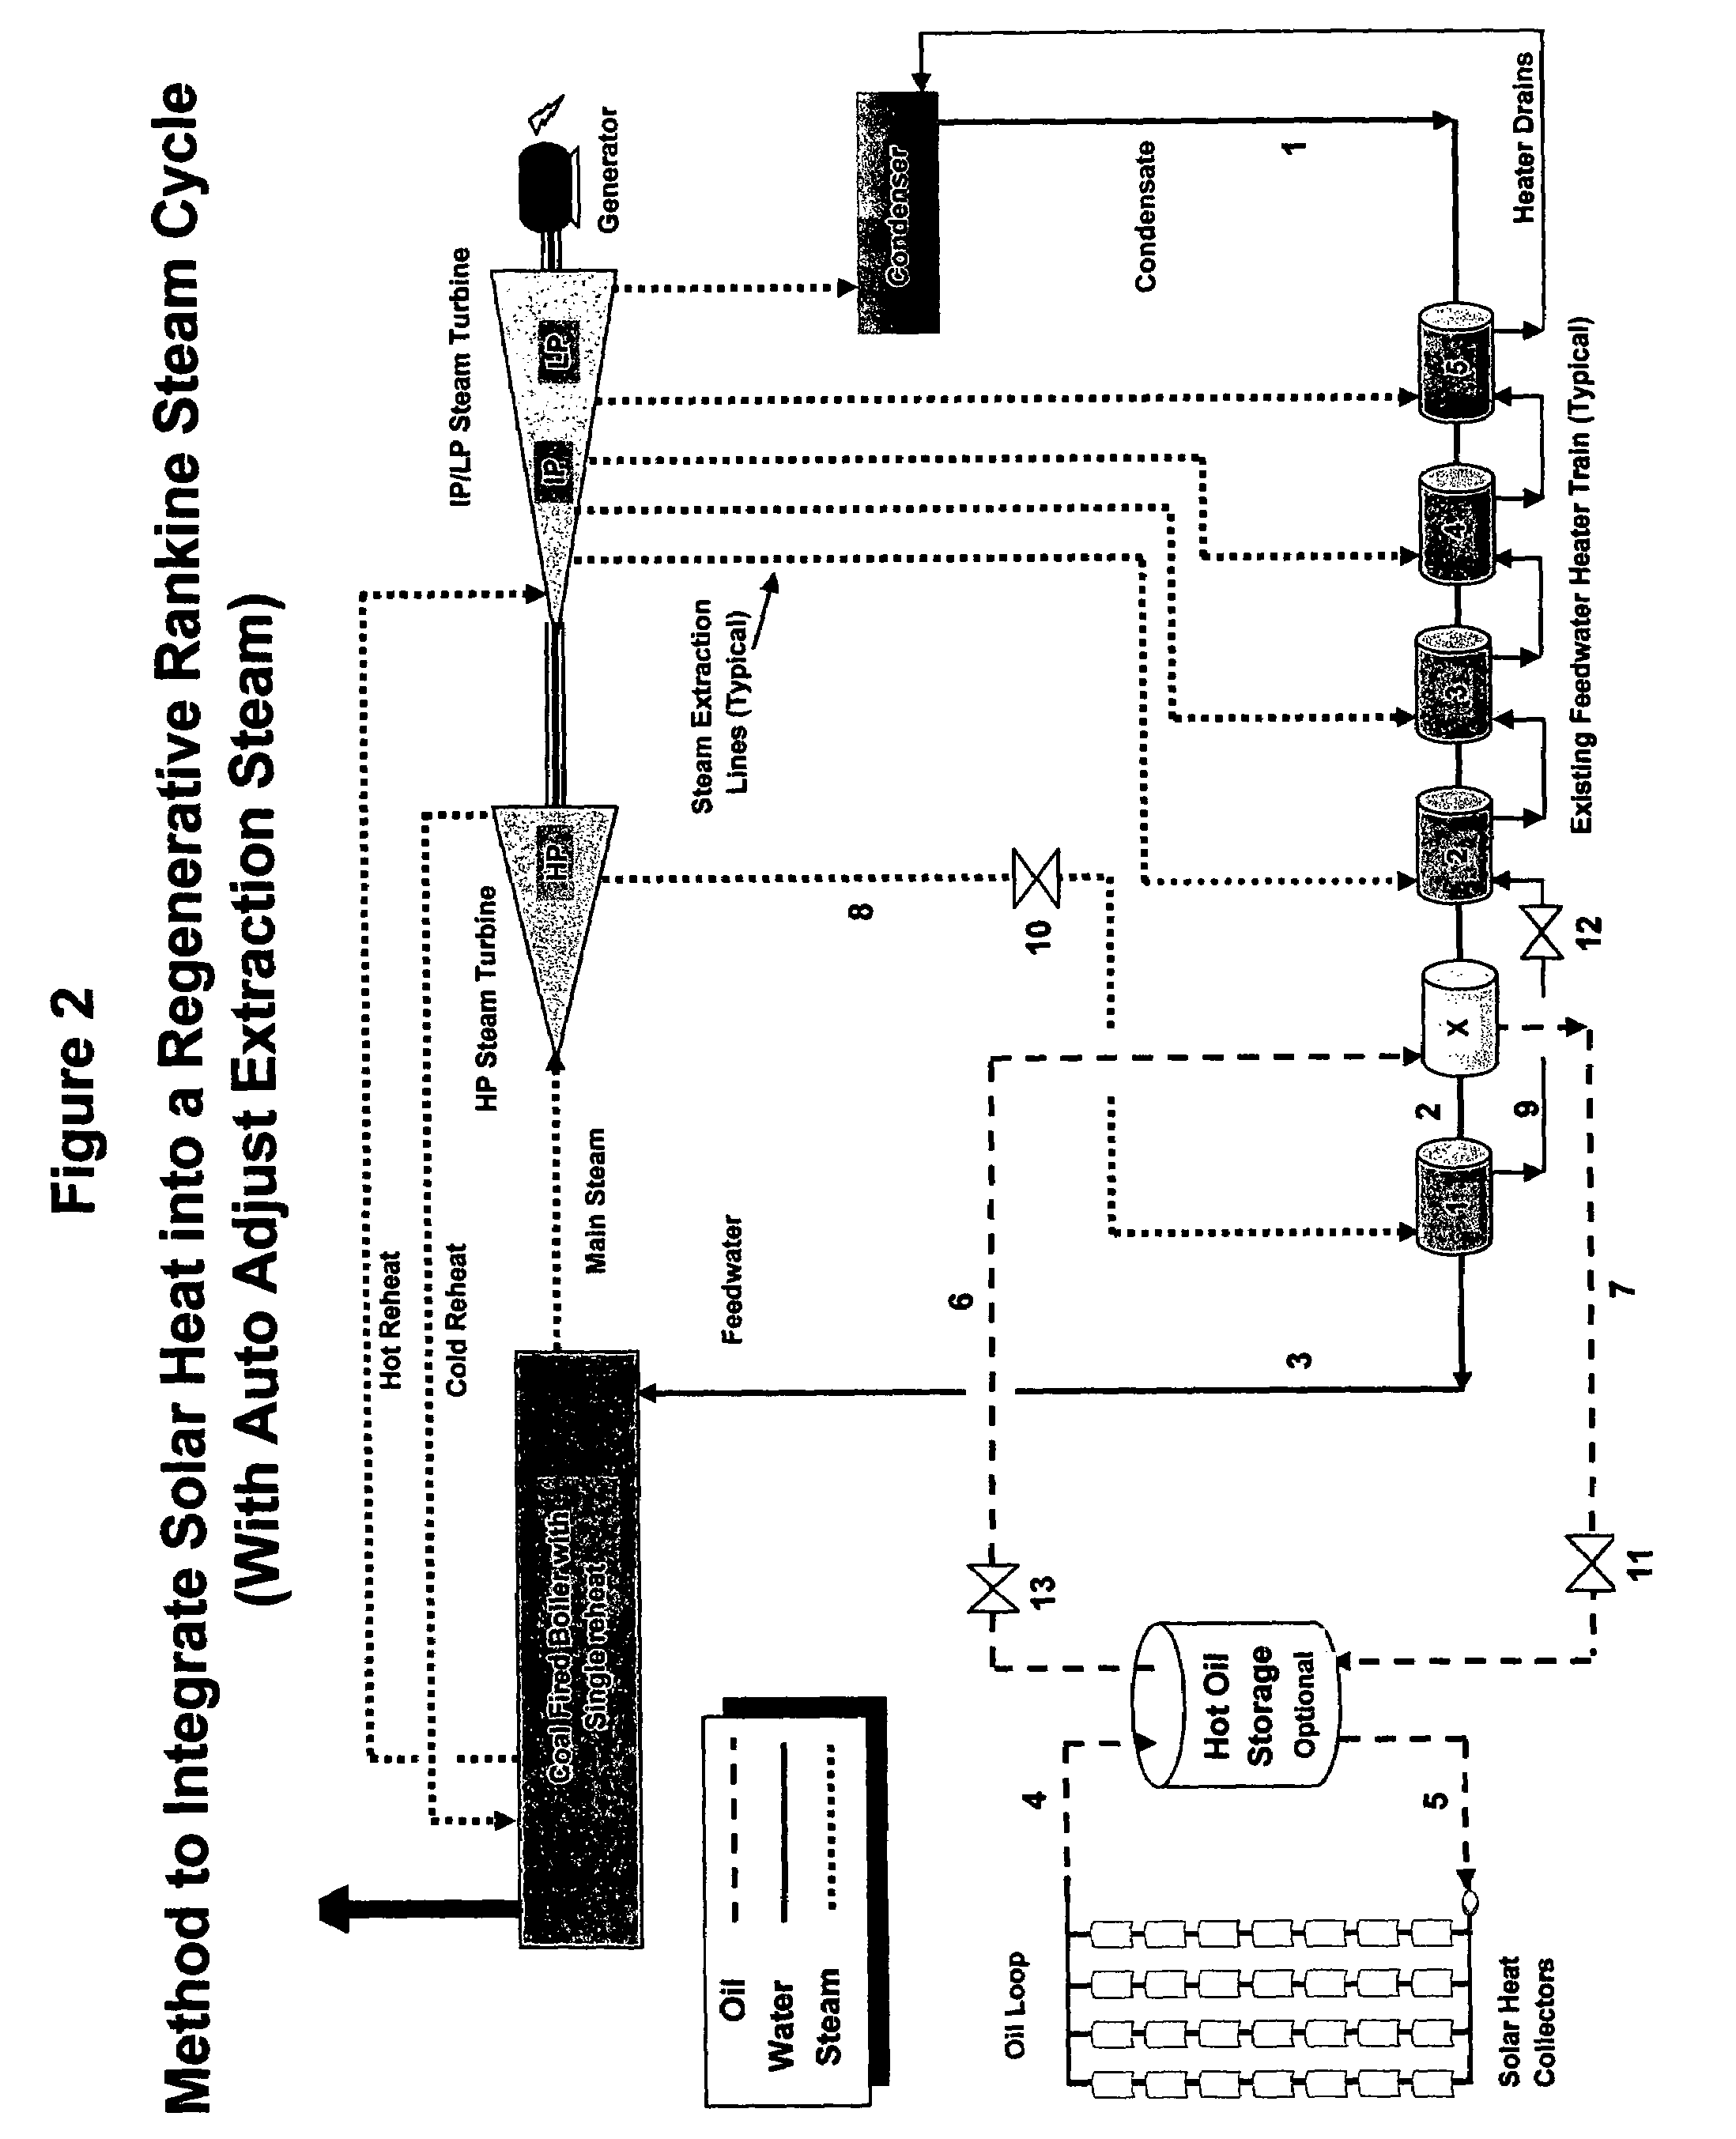 Method and system integrating solar heat into a regenerative rankine steam cycle